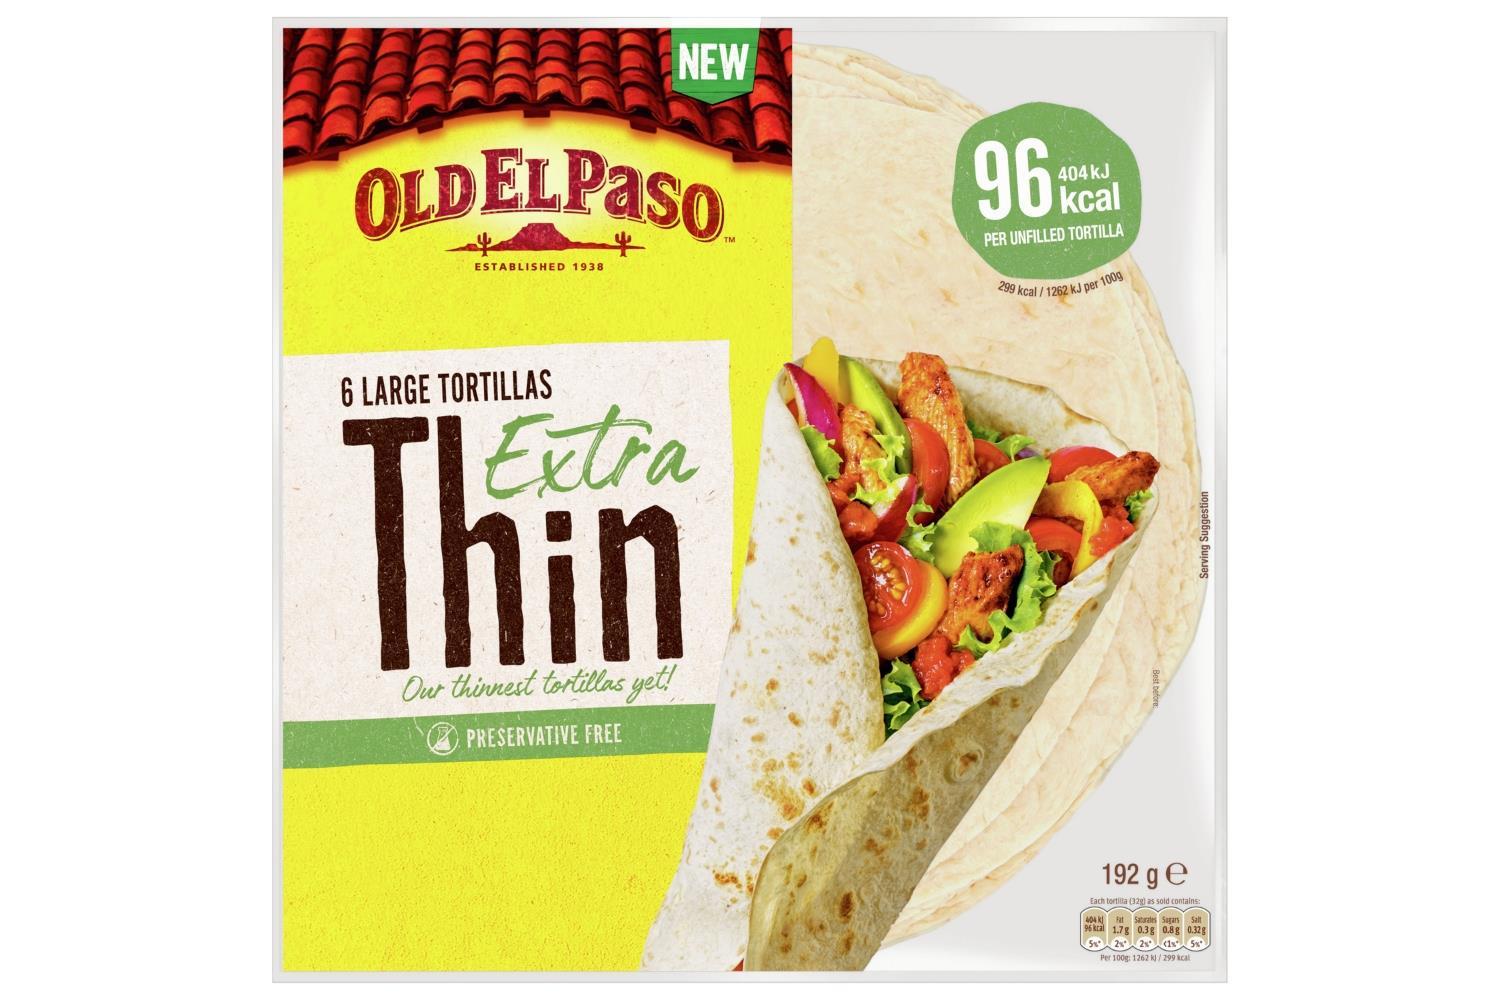 Old el Paso ramps up 'healthy' offering with Extra Thin tortillas